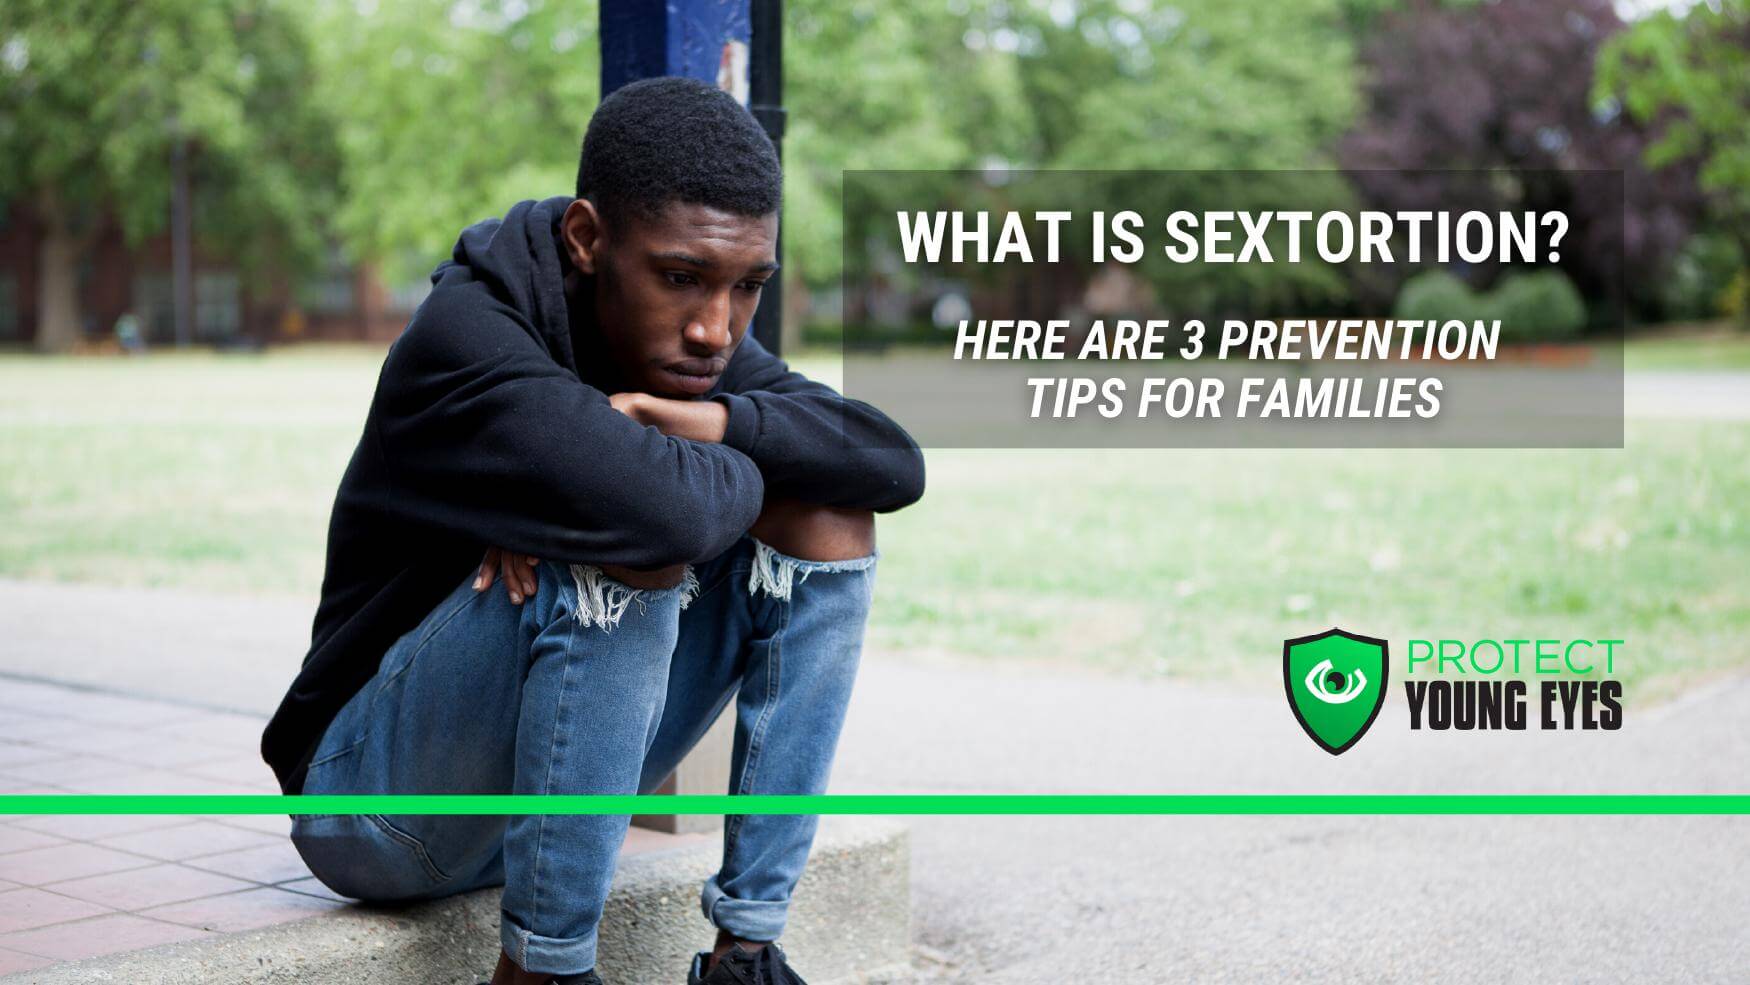 Xxx Videos Download 18 Year - What is Sextortion? 3 Prevention Tips for Families - Protect Young Eyes